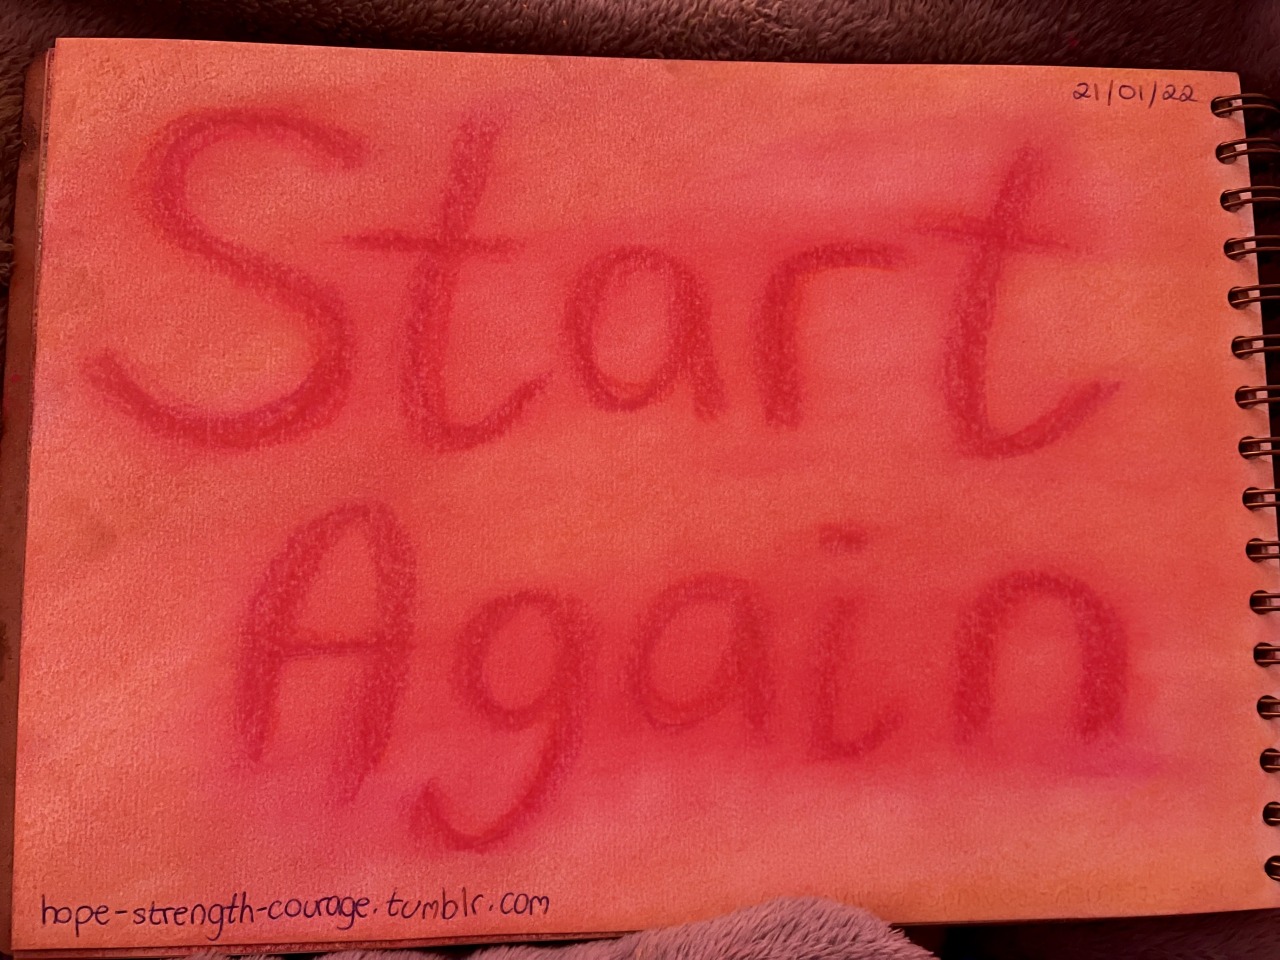 My Doodles; Start Again - 21/01/2022 #My Doodles#Doodles#Drawing#Creative#Expressing Myself#Meaningful#Art #Art With Pastels #Pastels #Pen To Paper #Words#Writing#Start Again